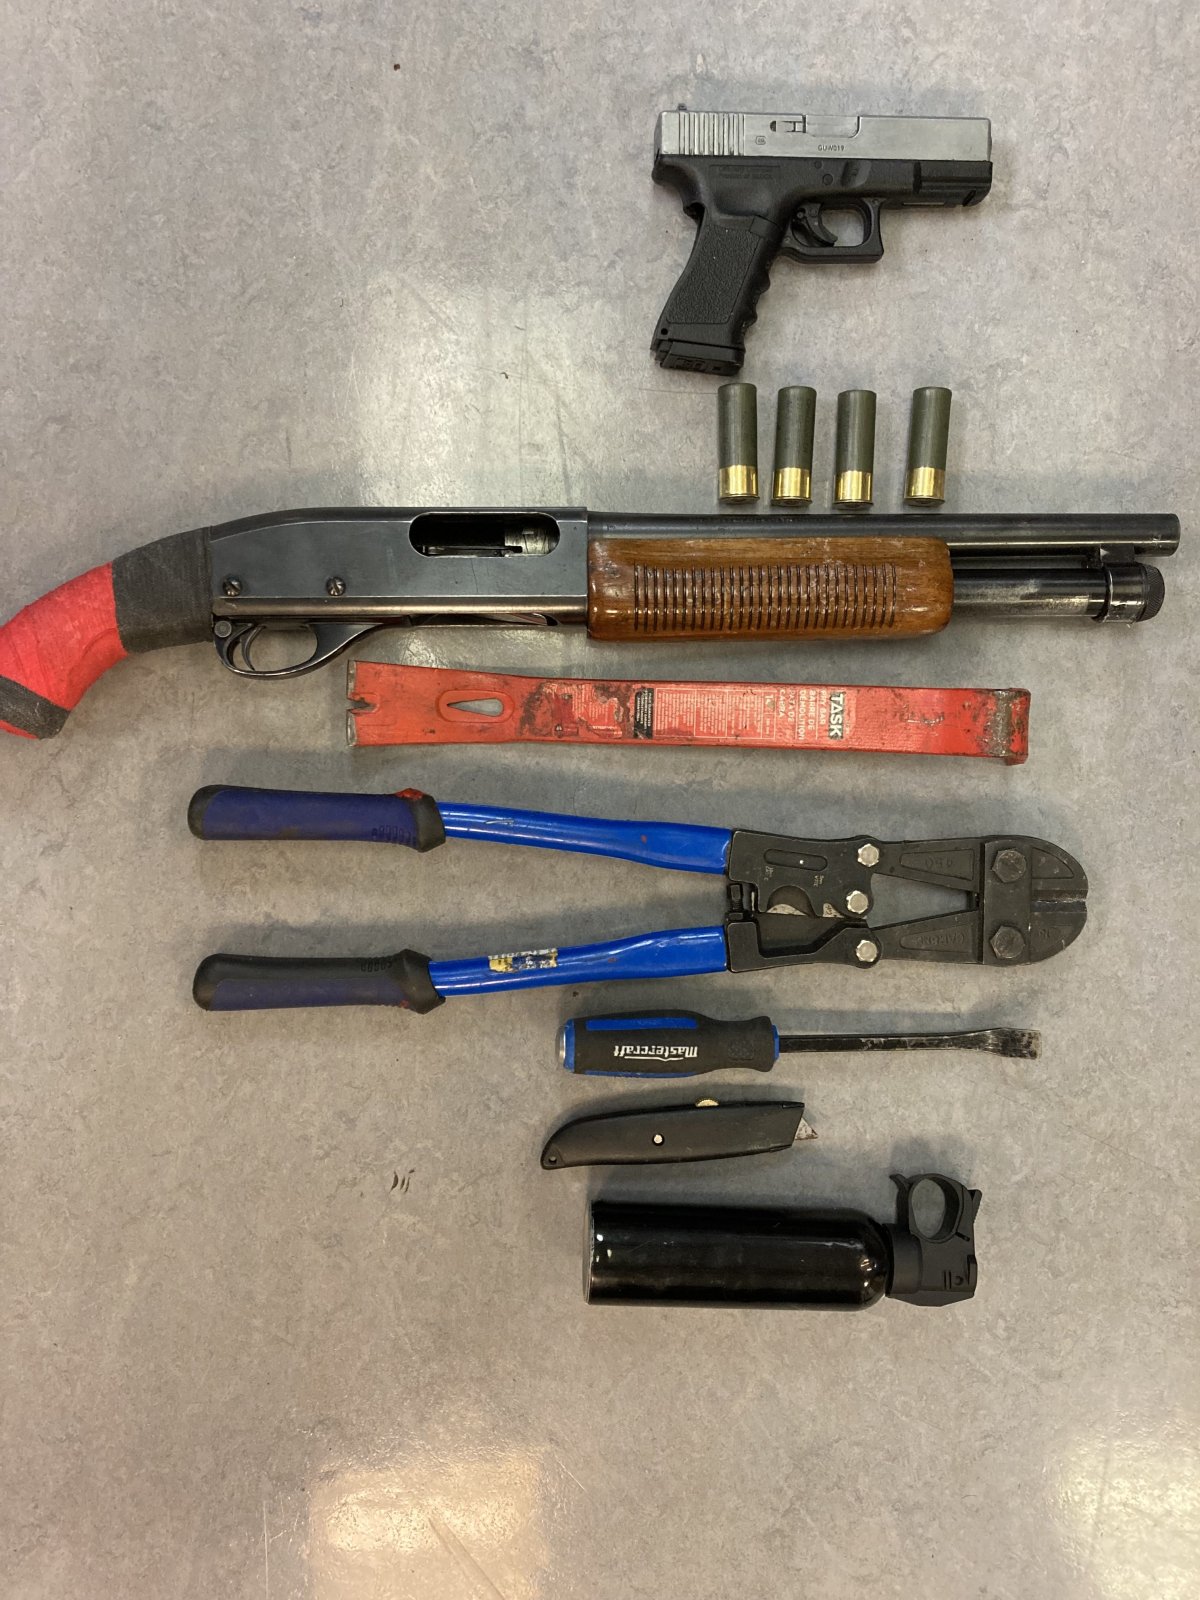 Firearms seized by Dauphin RCMP. 